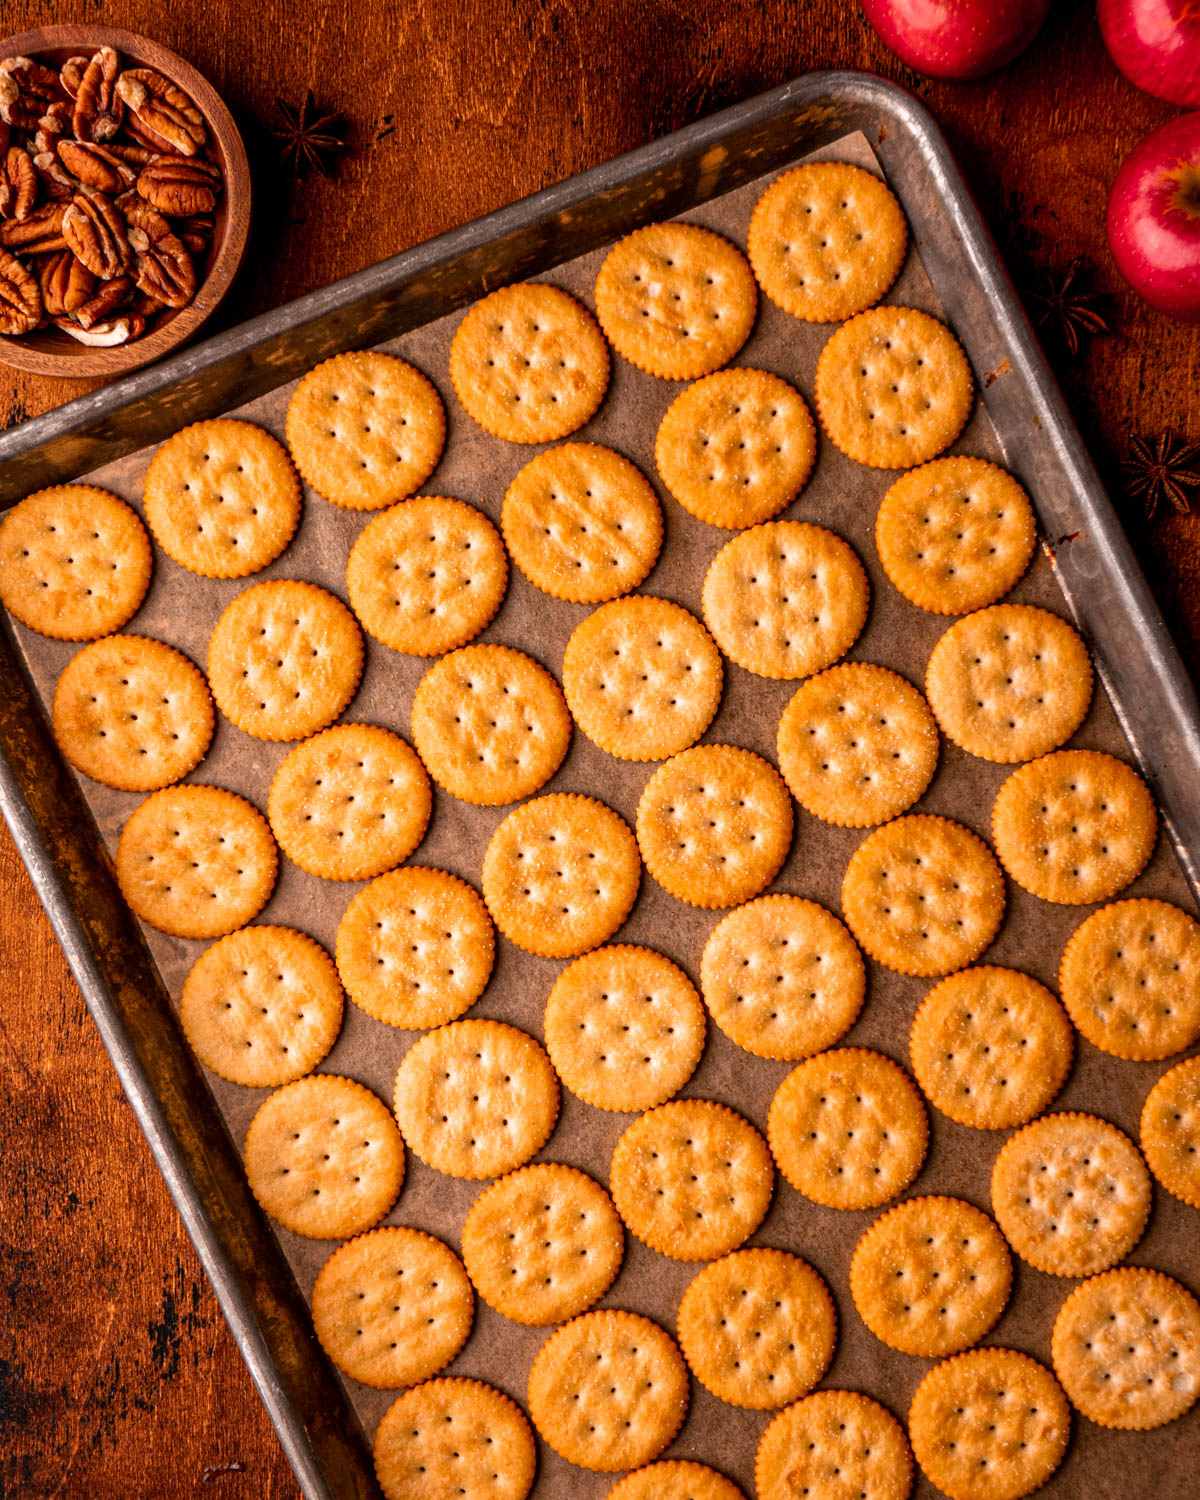 Ritz crackers arranged on parchment paper lined baking sheet